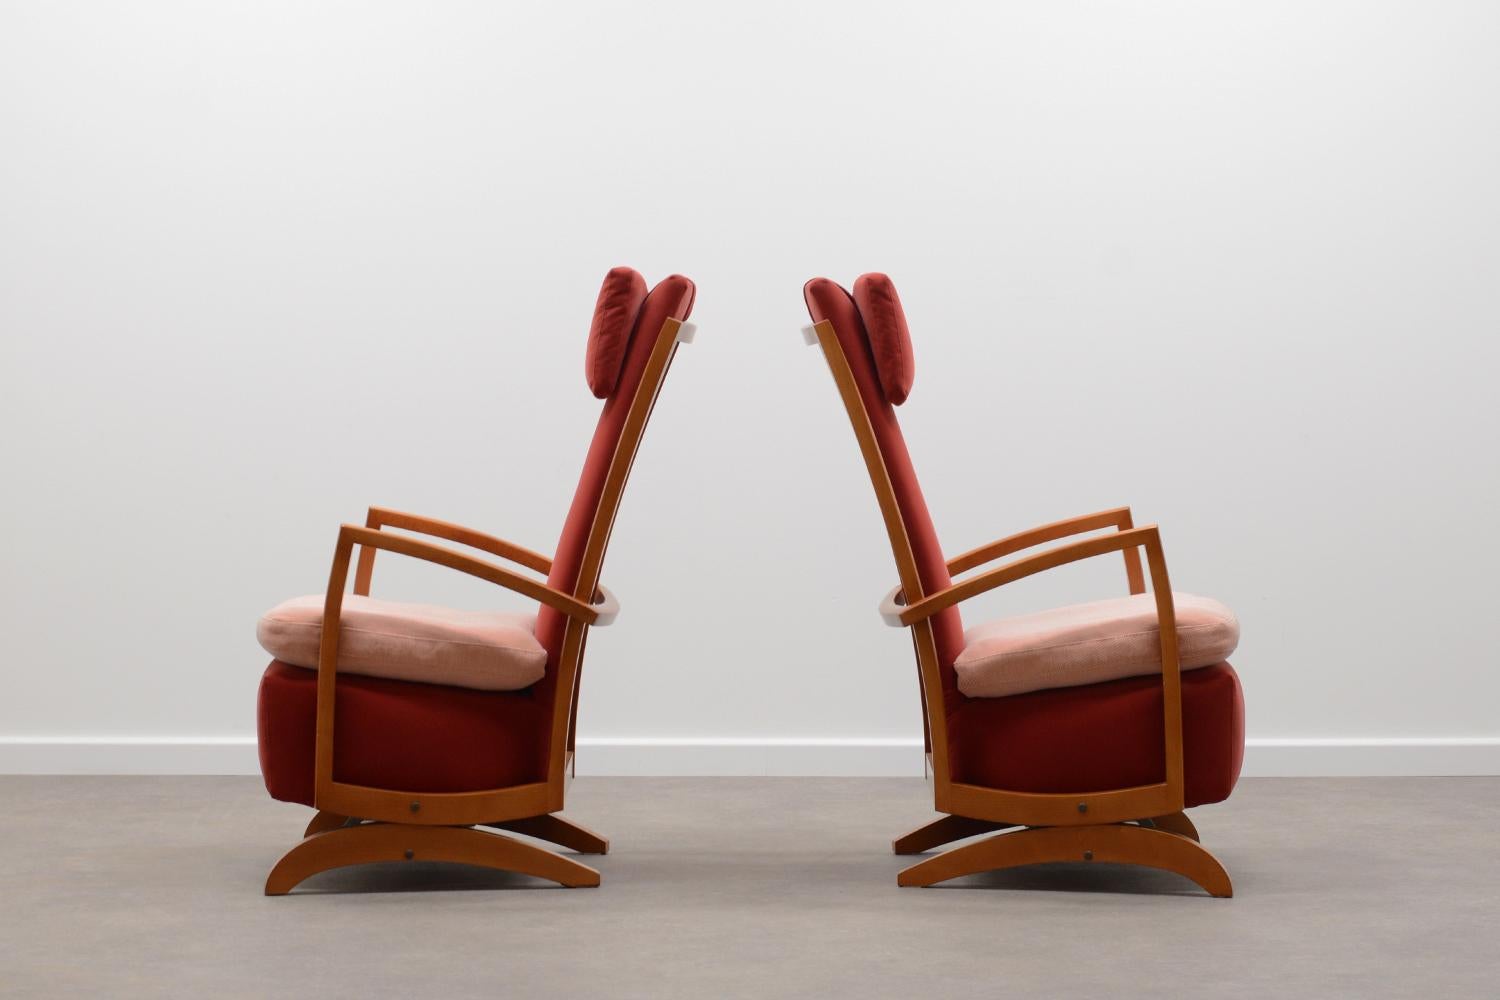 Set of 2 rare rocking chairs 80s in a art deco style. Beech wood frame with red velvet upholstery and fabrik seat cushion. This rocker has a spring rocking system. In very good vintage condition. Price for the set of 2.